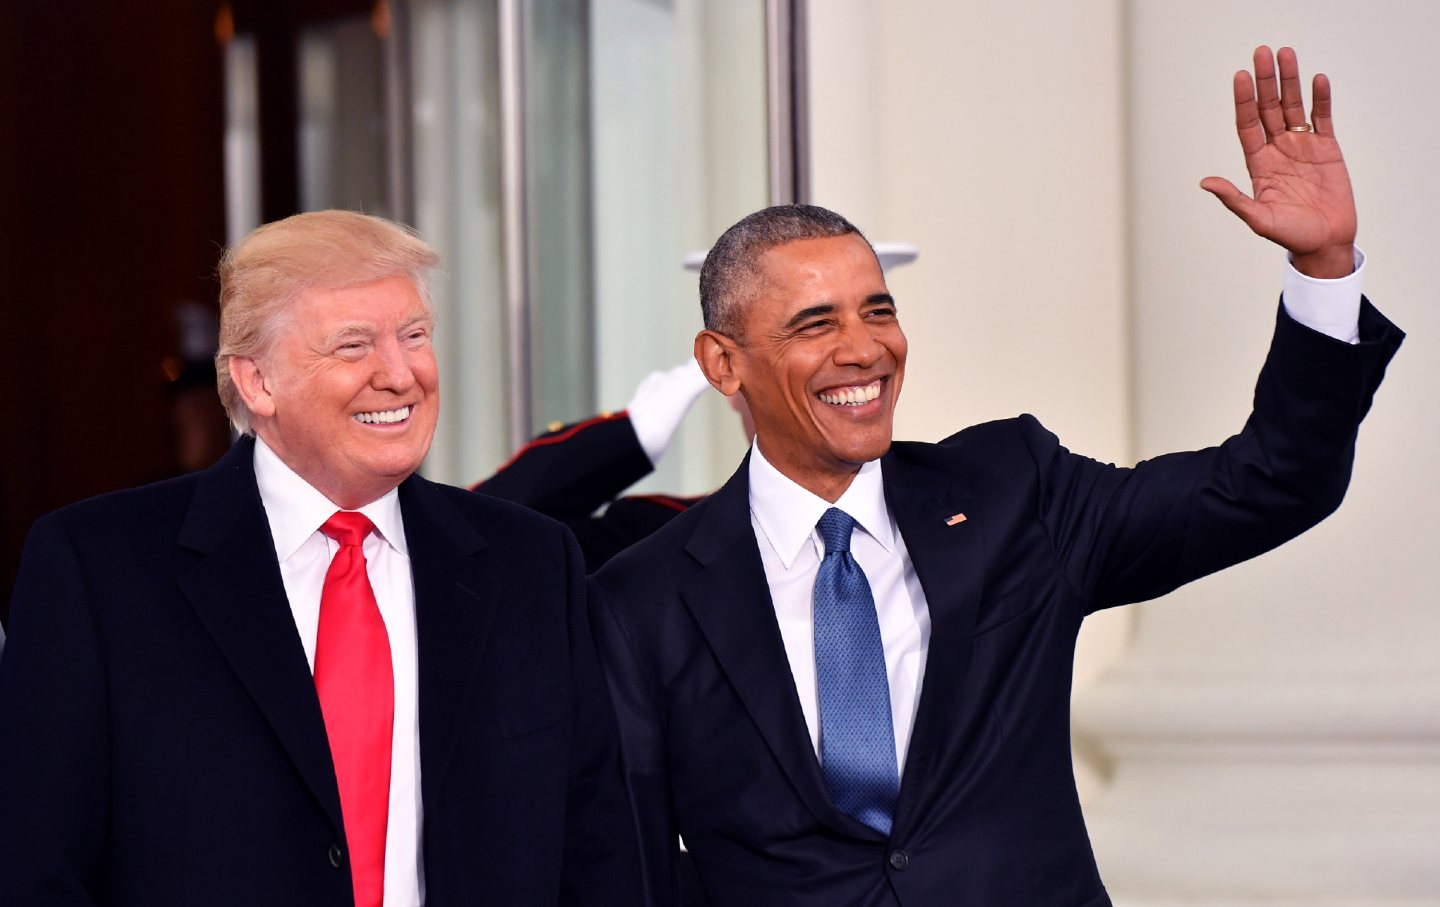 President Barack Obama and then-President-elect Donald Trump smile before the 2017 inauguration.